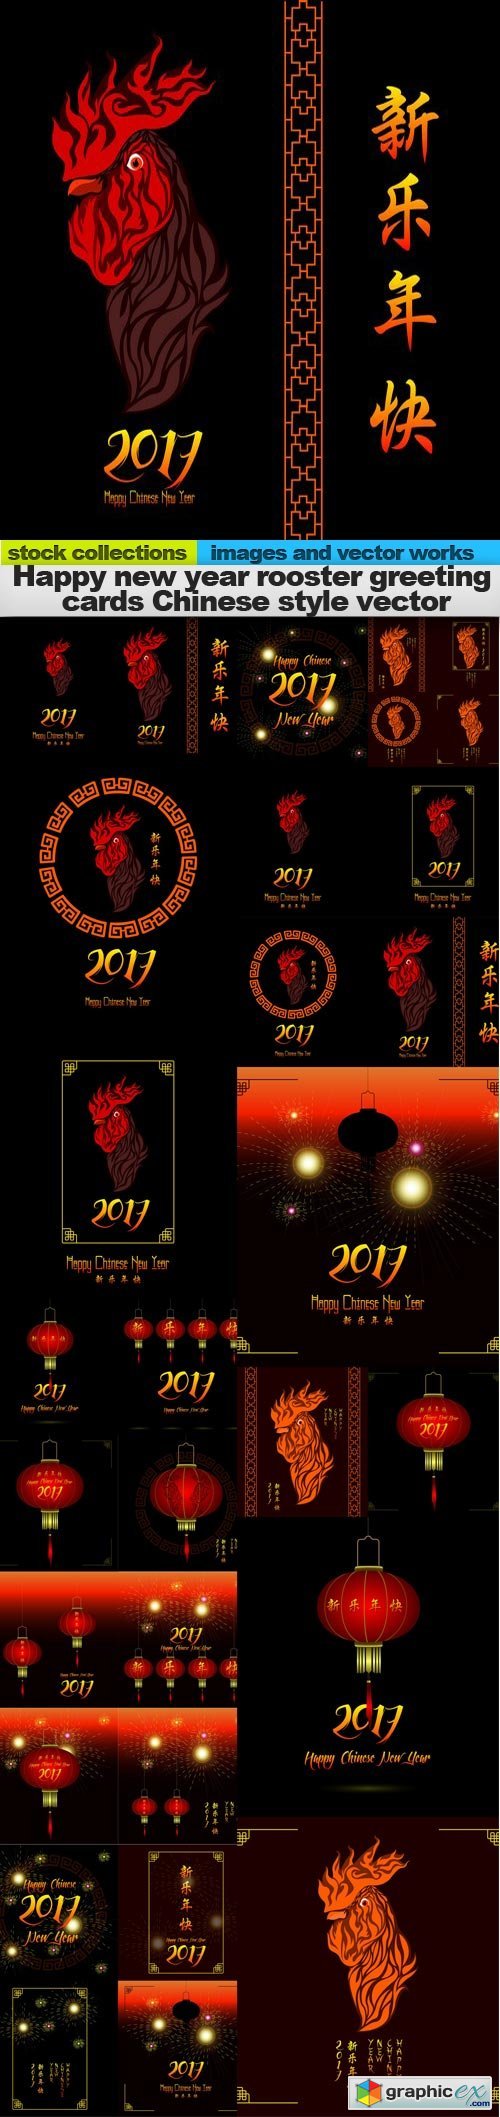 Happy new year rooster greeting cards Chinese style vector, 15 x EPS